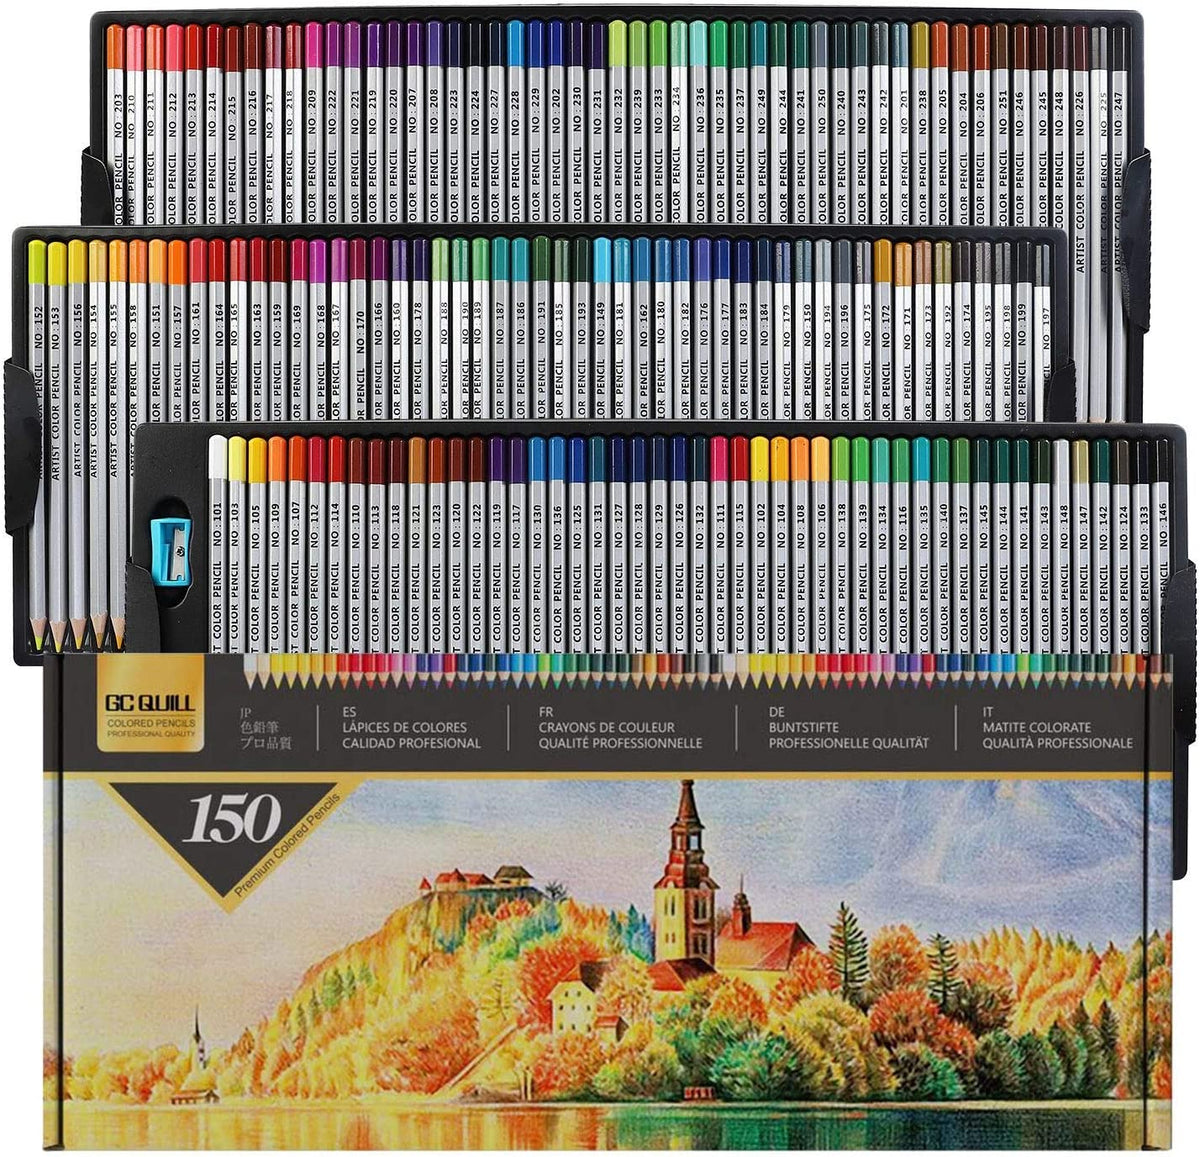 Colouring Pencils-150 Colored Pencils Drawing Set- Art Pencils for Colouring, Drawing, Sketching, Shading, Blending-for Adults, Children, Professional Artists GC-CP-150